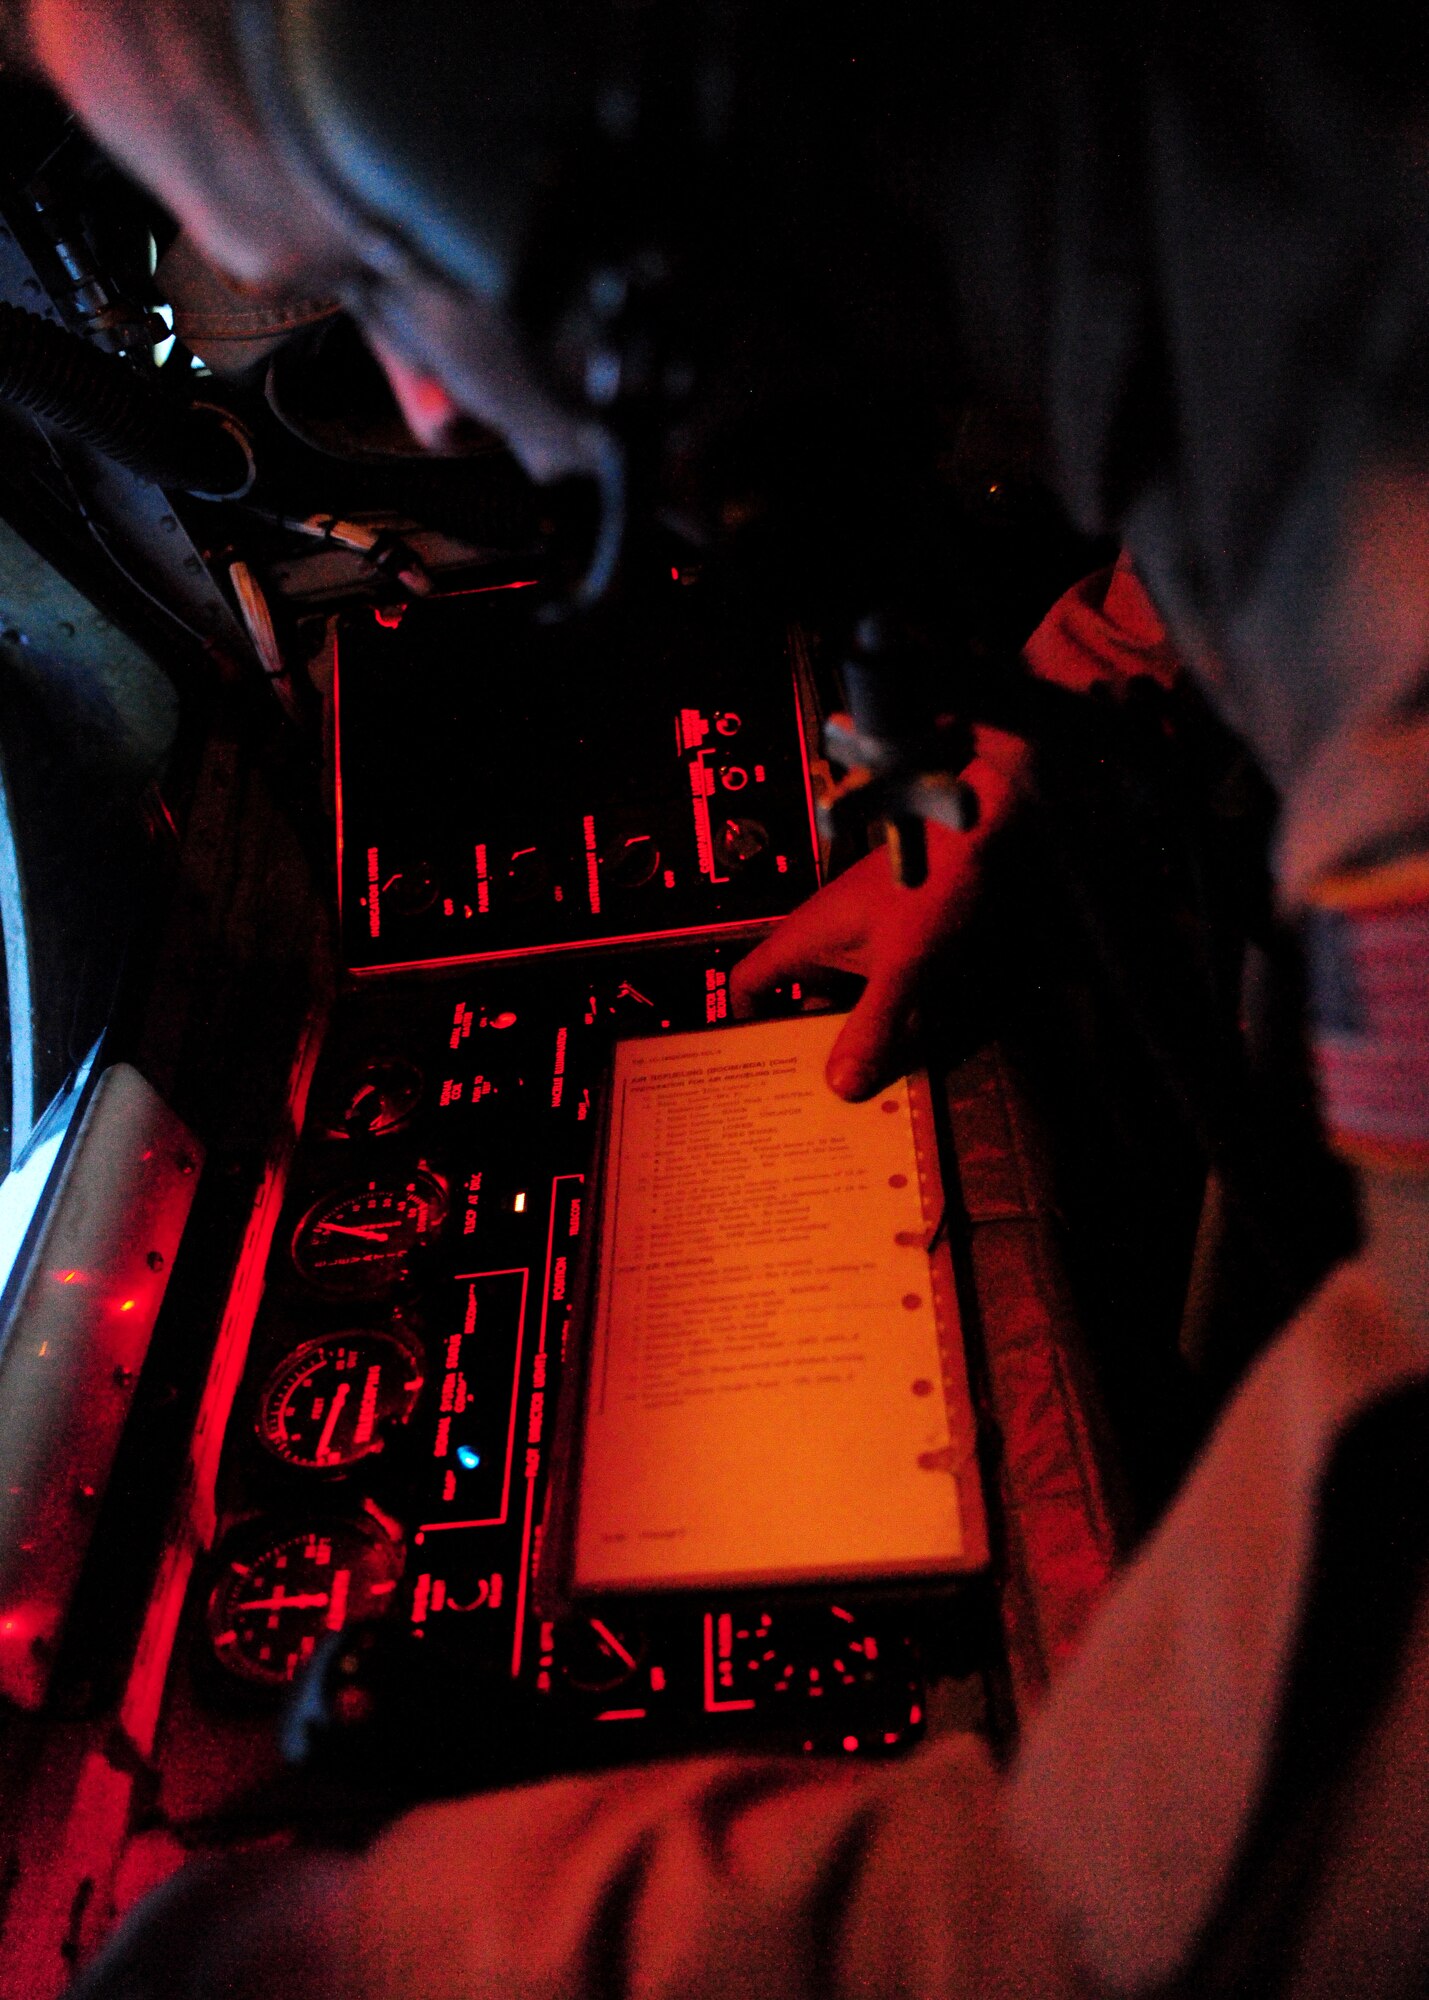 Senior Master Sgt. Todd Daniels, 22nd Expeditionary Air Refueling Squadron aerial refueler, operates the controls for the boom in the back of a KC-135 Stratotanker over Afghanistan April 10, 2010. The day of April 10 made 22nd EARS history when an air crew logged the 16,000th sortie. (U.S. Air Force photo/Senior Airman Nichelle Anderson/released)